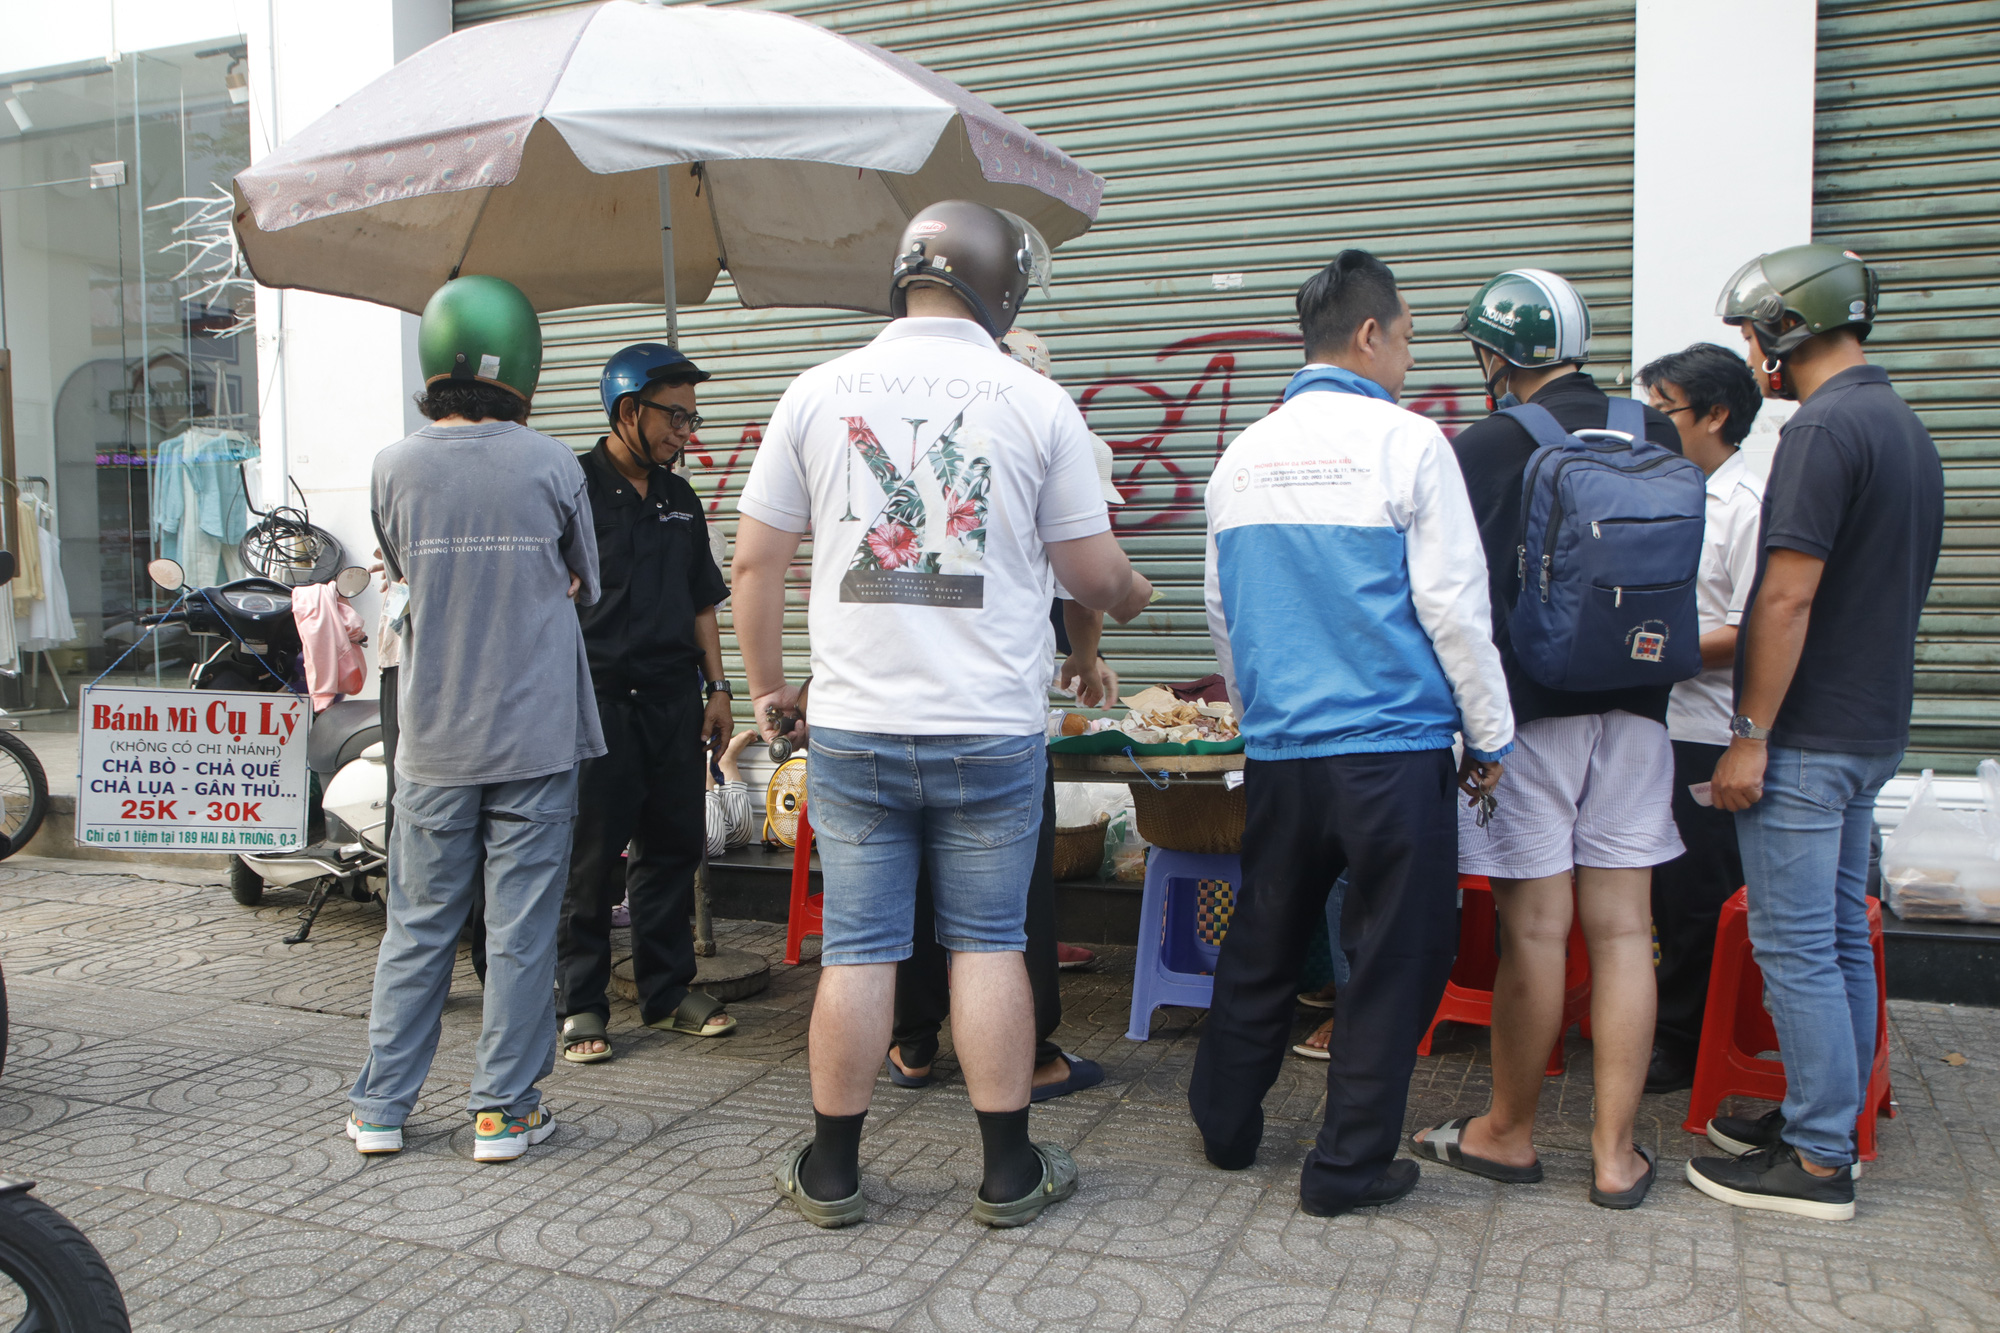 Customers crowd Mr. Ly’s 'banh mi' stall on Hai Ba Trung Street in District 3, Ho Chi Minh City. Photo: Ho Lam / Tuoi Tre